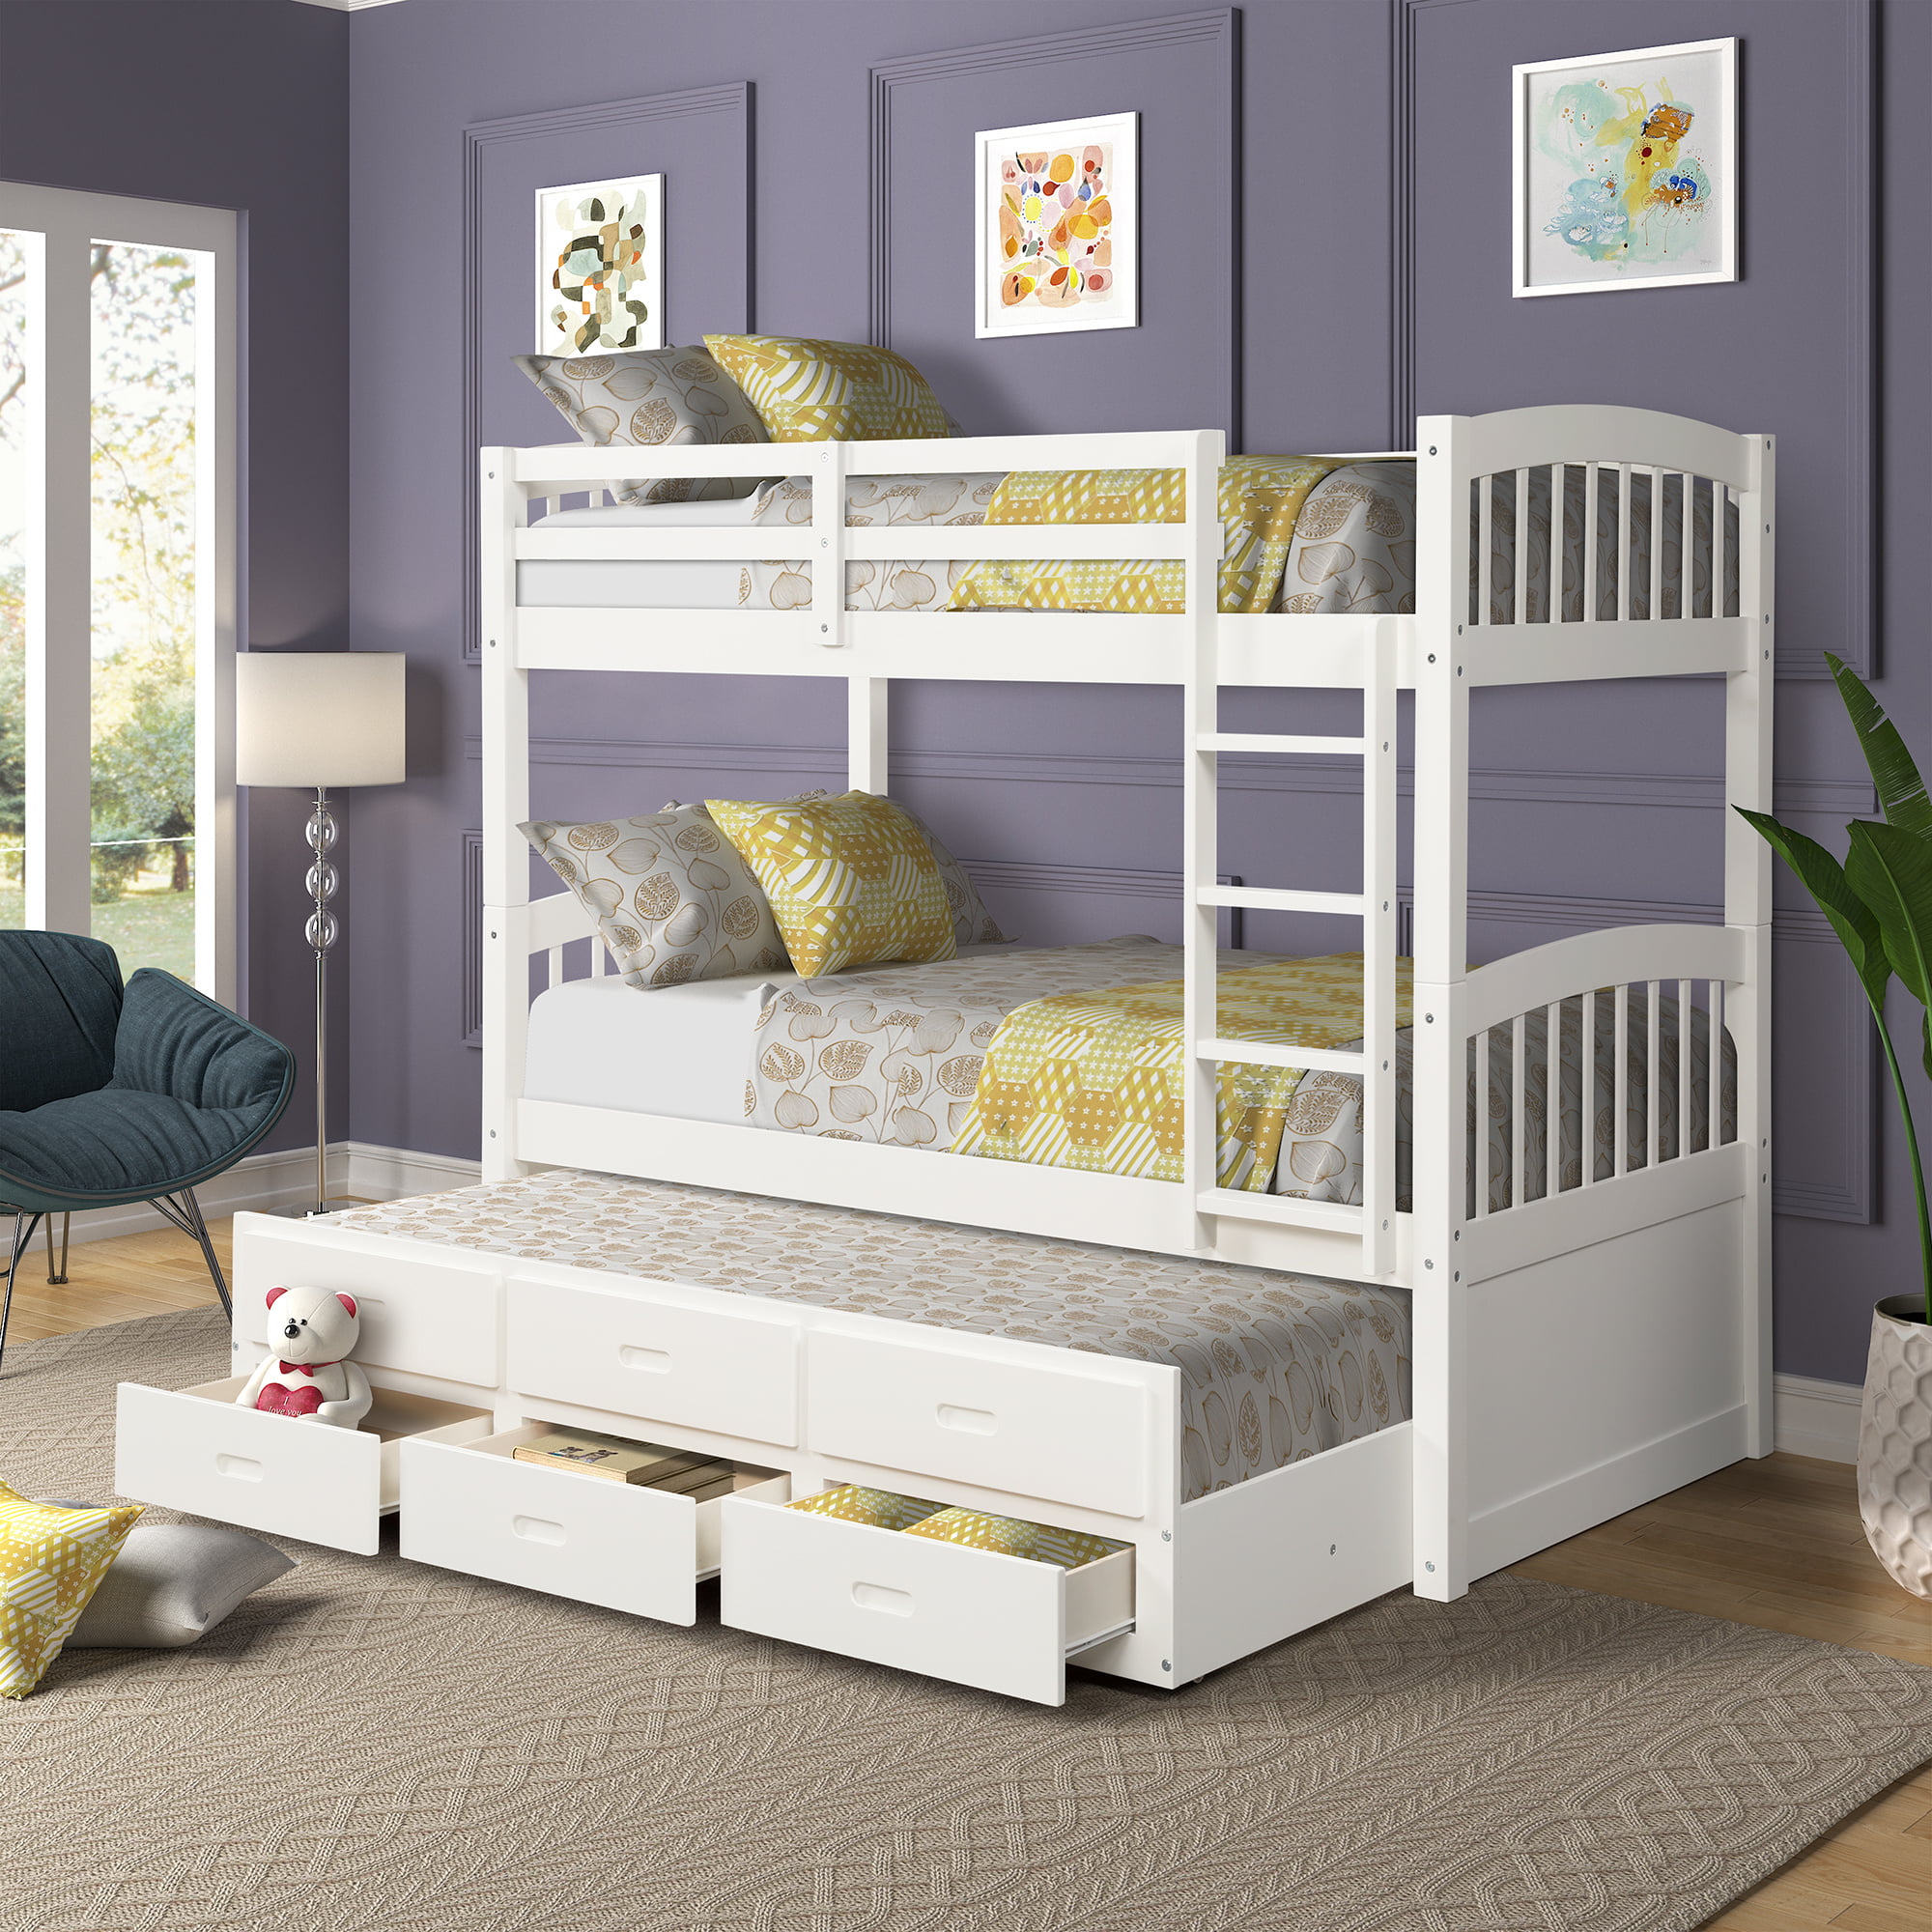 Solid Wood Bunk Beds For Kids Hardwood, Gently Used Bunk Beds